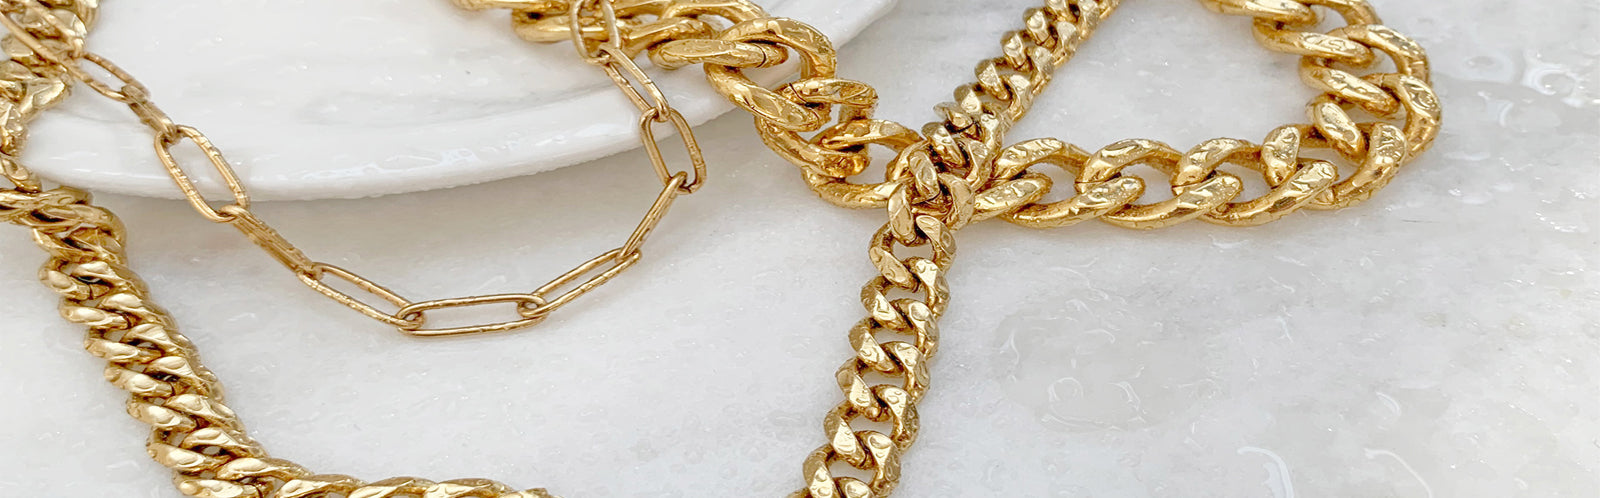 Gold and Silver Chain Necklaces - Waterproof Jewelry Tarnish